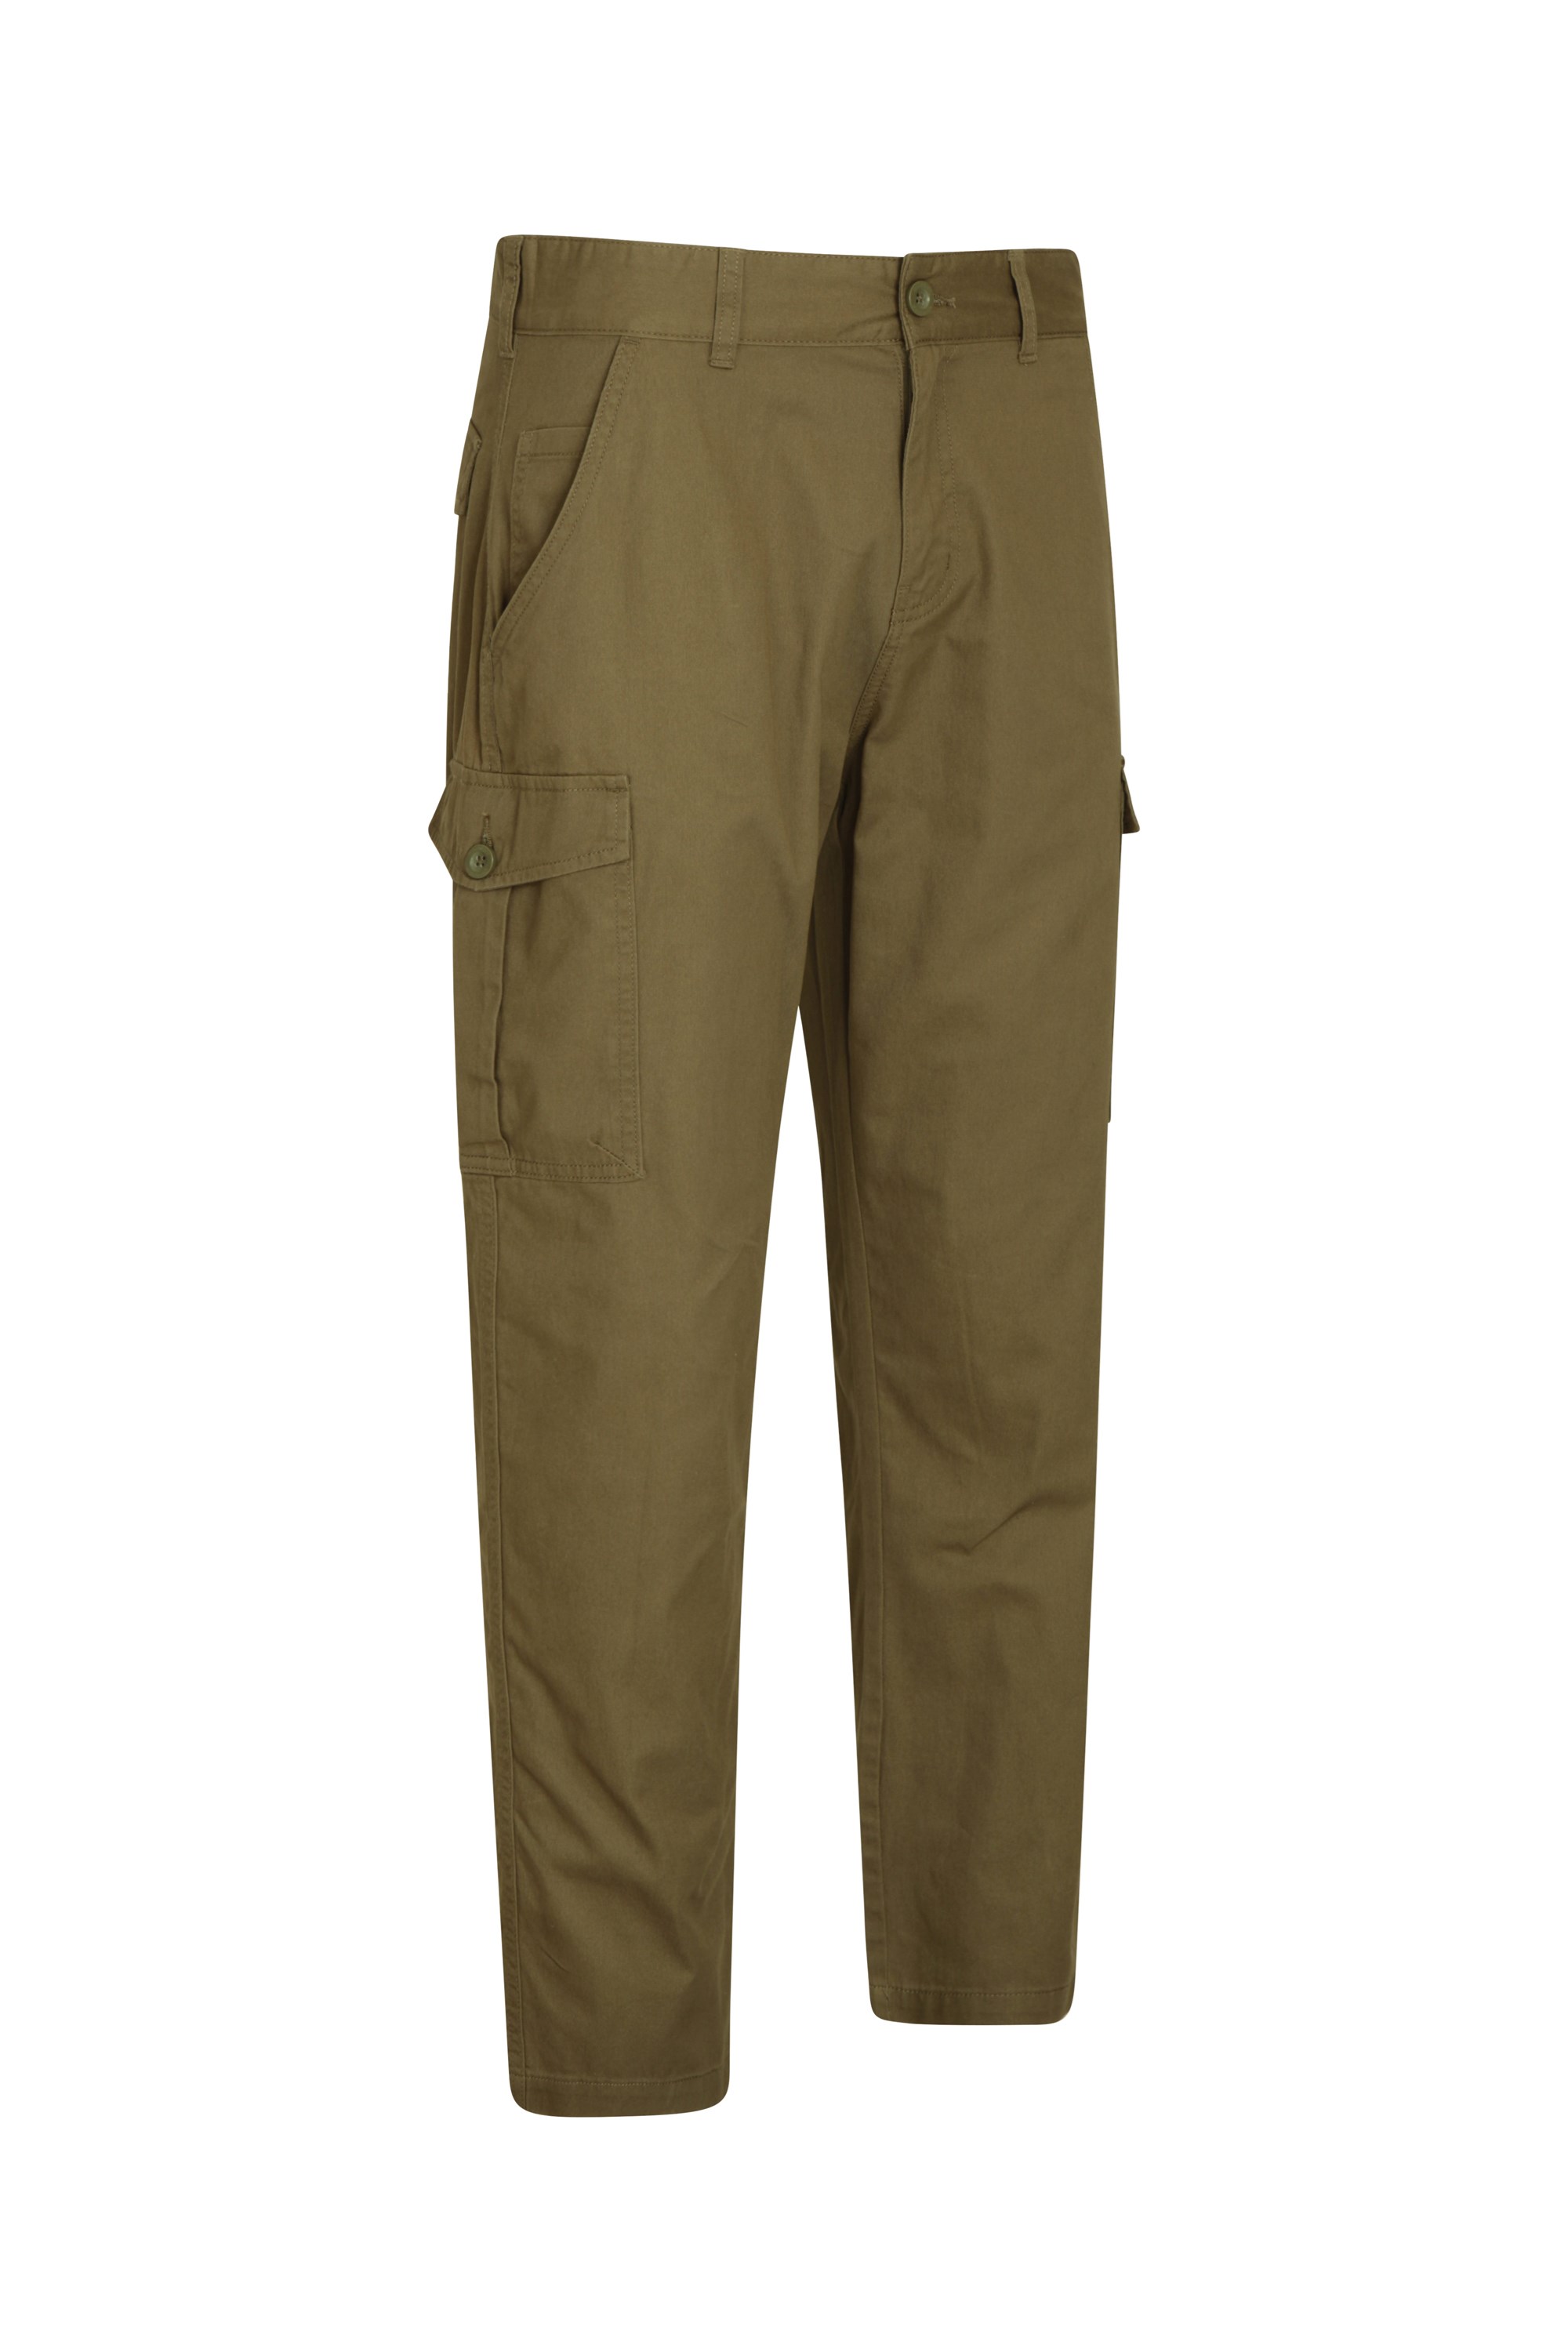 MOUNTAIN WAREHOUSE CARGO COMBO TROUSERS BEIZE SIZE 32x32  PREOWNED VGC STB N 